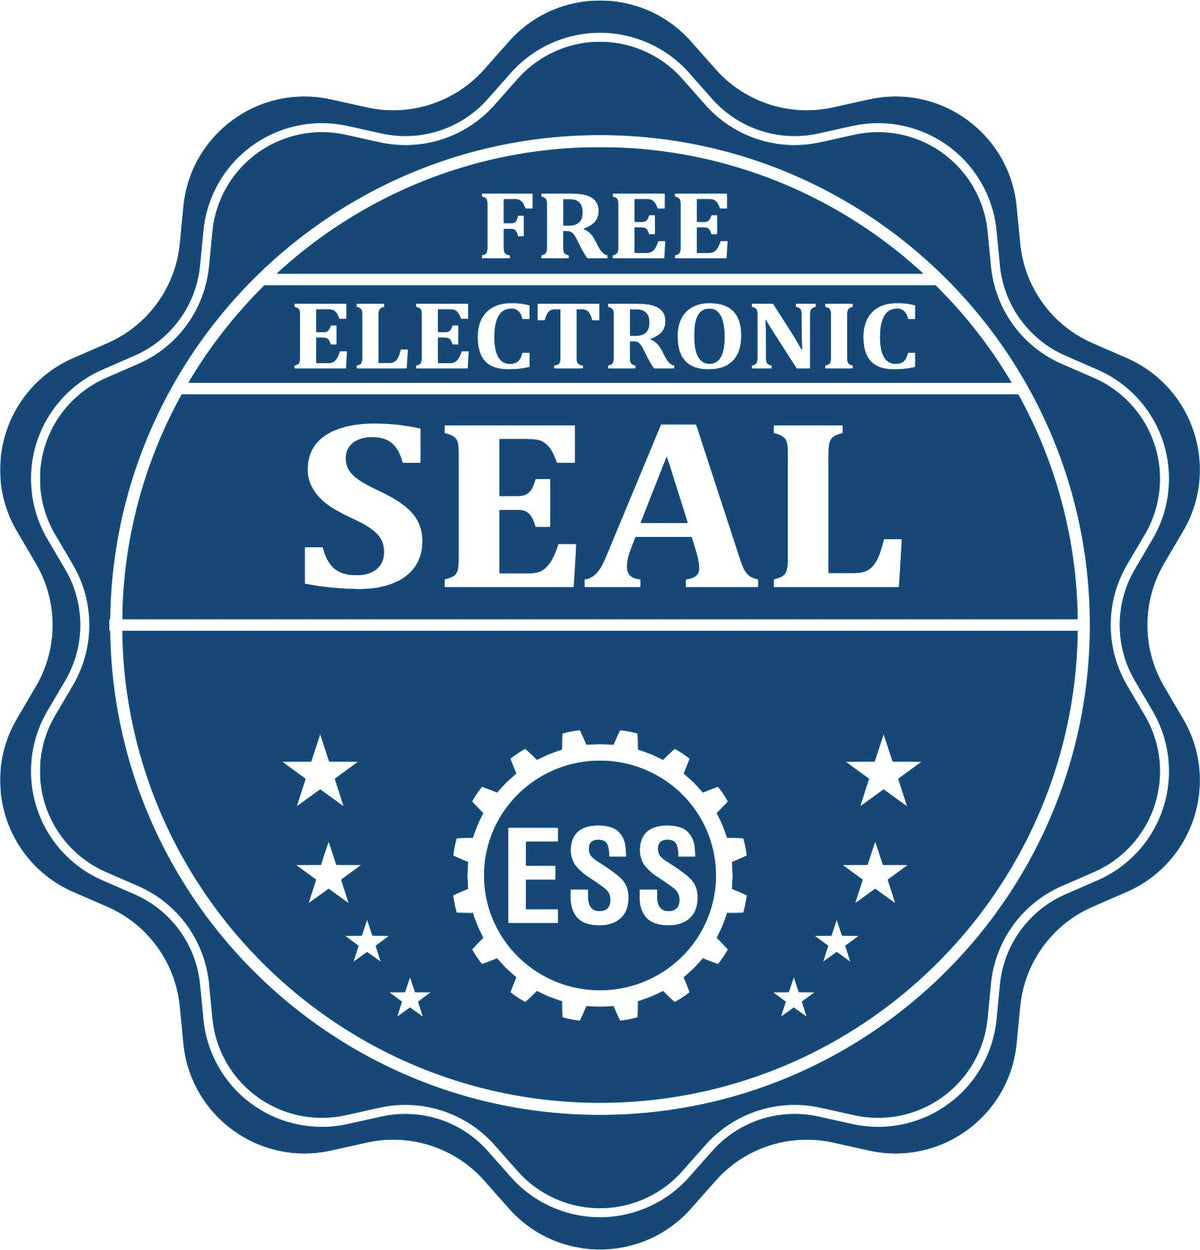 A badge showing a free electronic seal for the Slim Pre-Inked Indiana Land Surveyor Seal Stamp with stars and the ESS gear on the emblem.